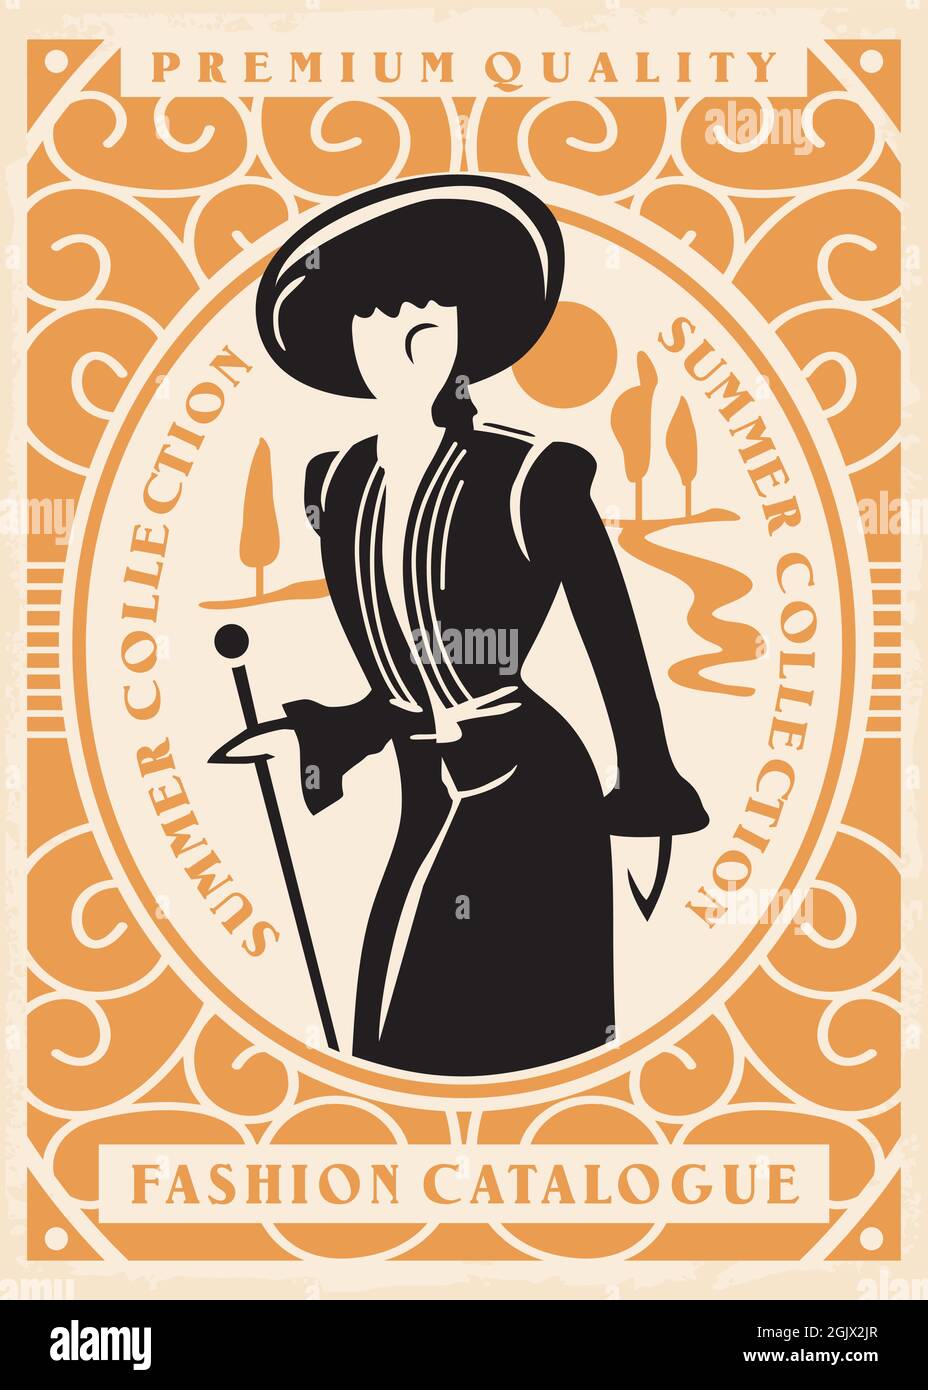 Vintage fashion catalogue cover with elegant lady from 1900s. Early century clothing boutique poster graphic. Woman figure with fashionable hat. Stock Vector